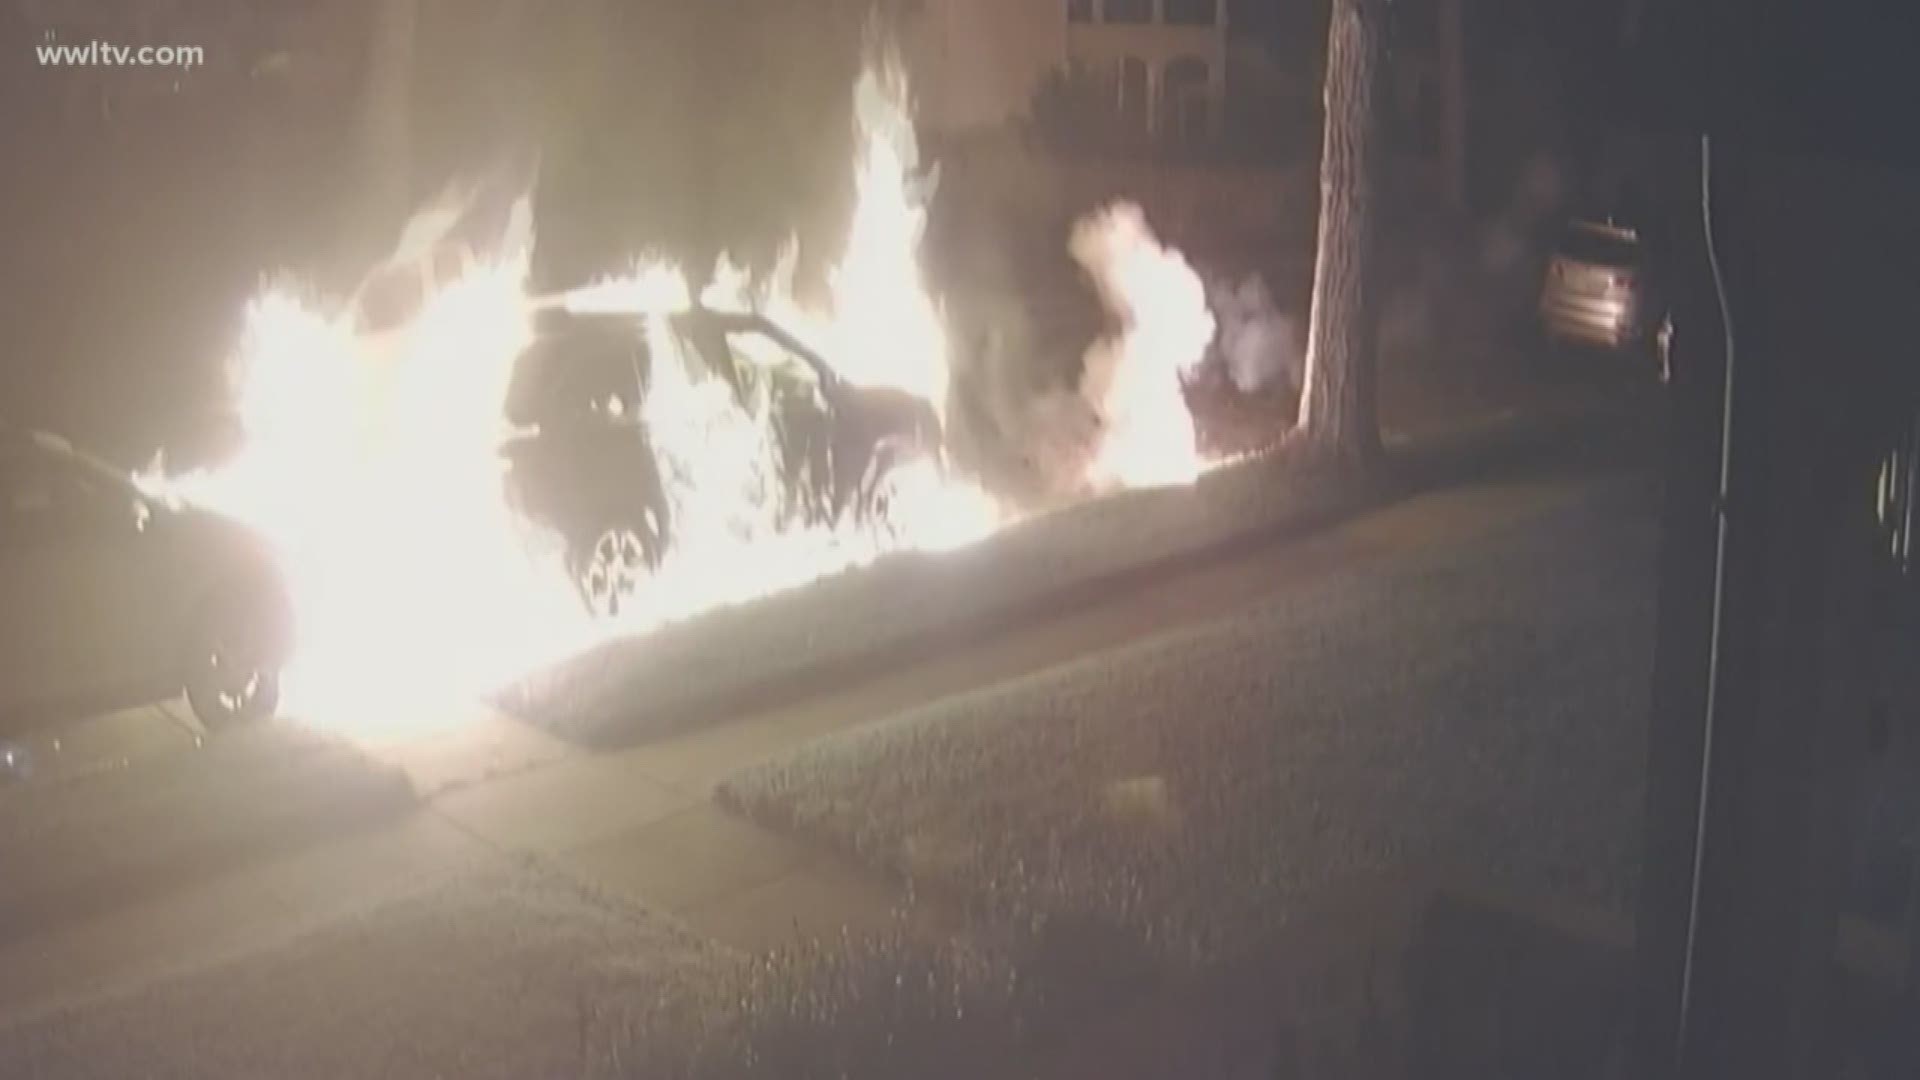 Wow! Your Water Bottle Could Set Your Car On Fire? [Video]